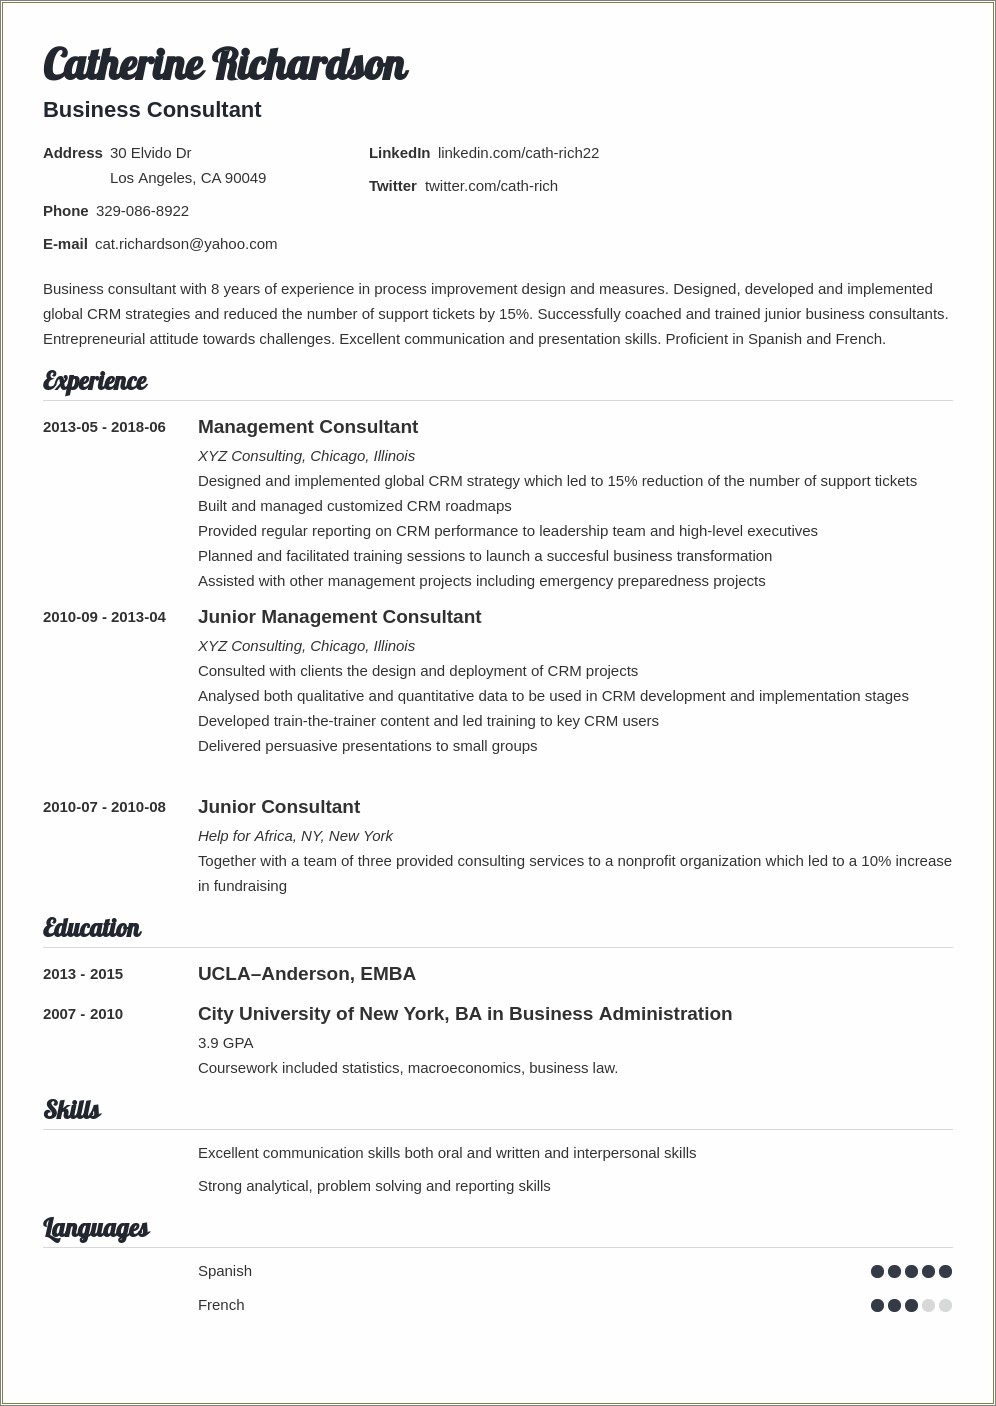 Best Resume To Seek First Time Gc Position